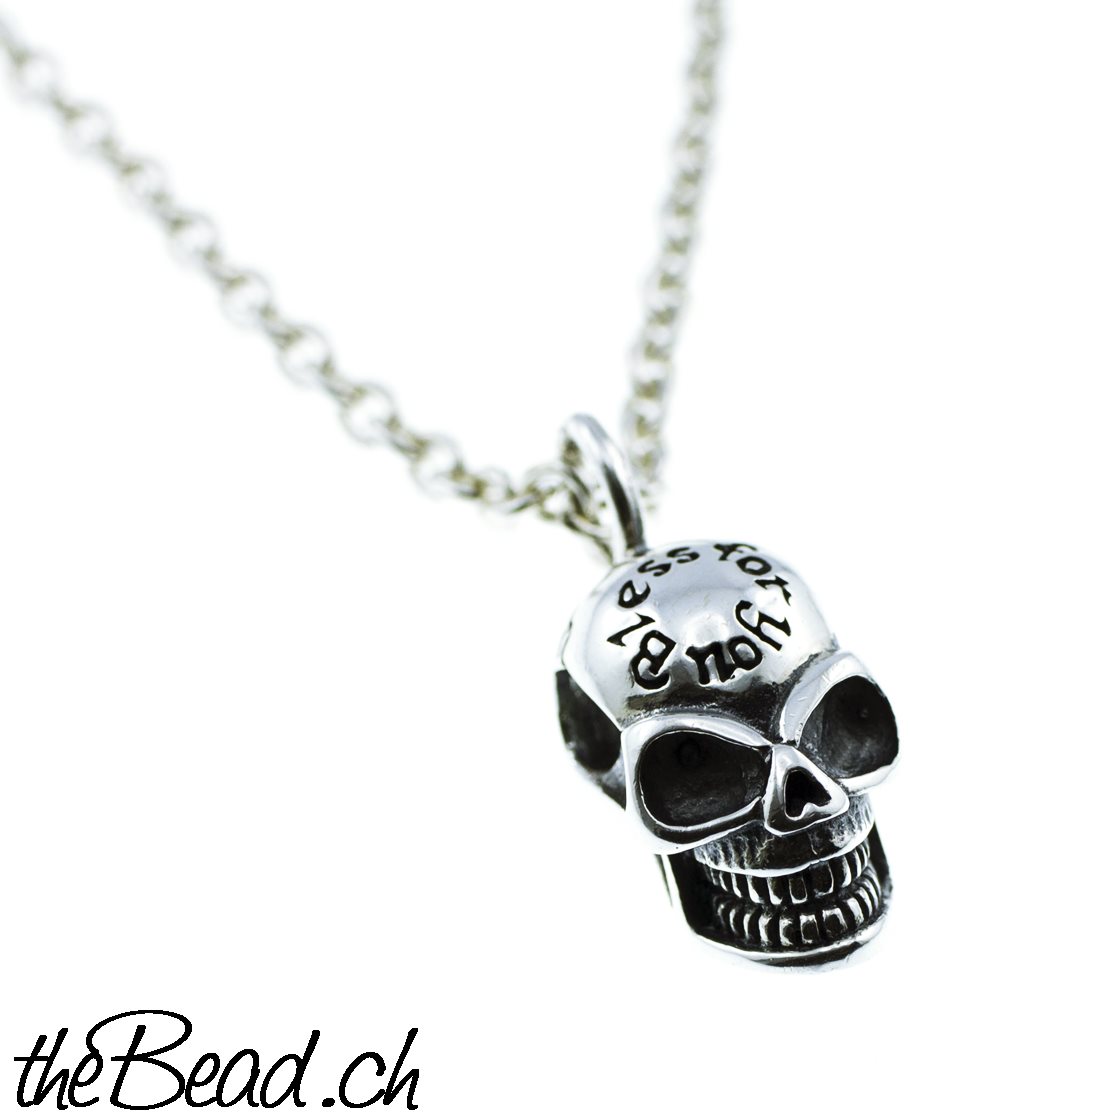 https://www.thebead.ch/images/product_images/original_images/Skull-totenkopf-anh%C3%A4nger-halsketten.jpg